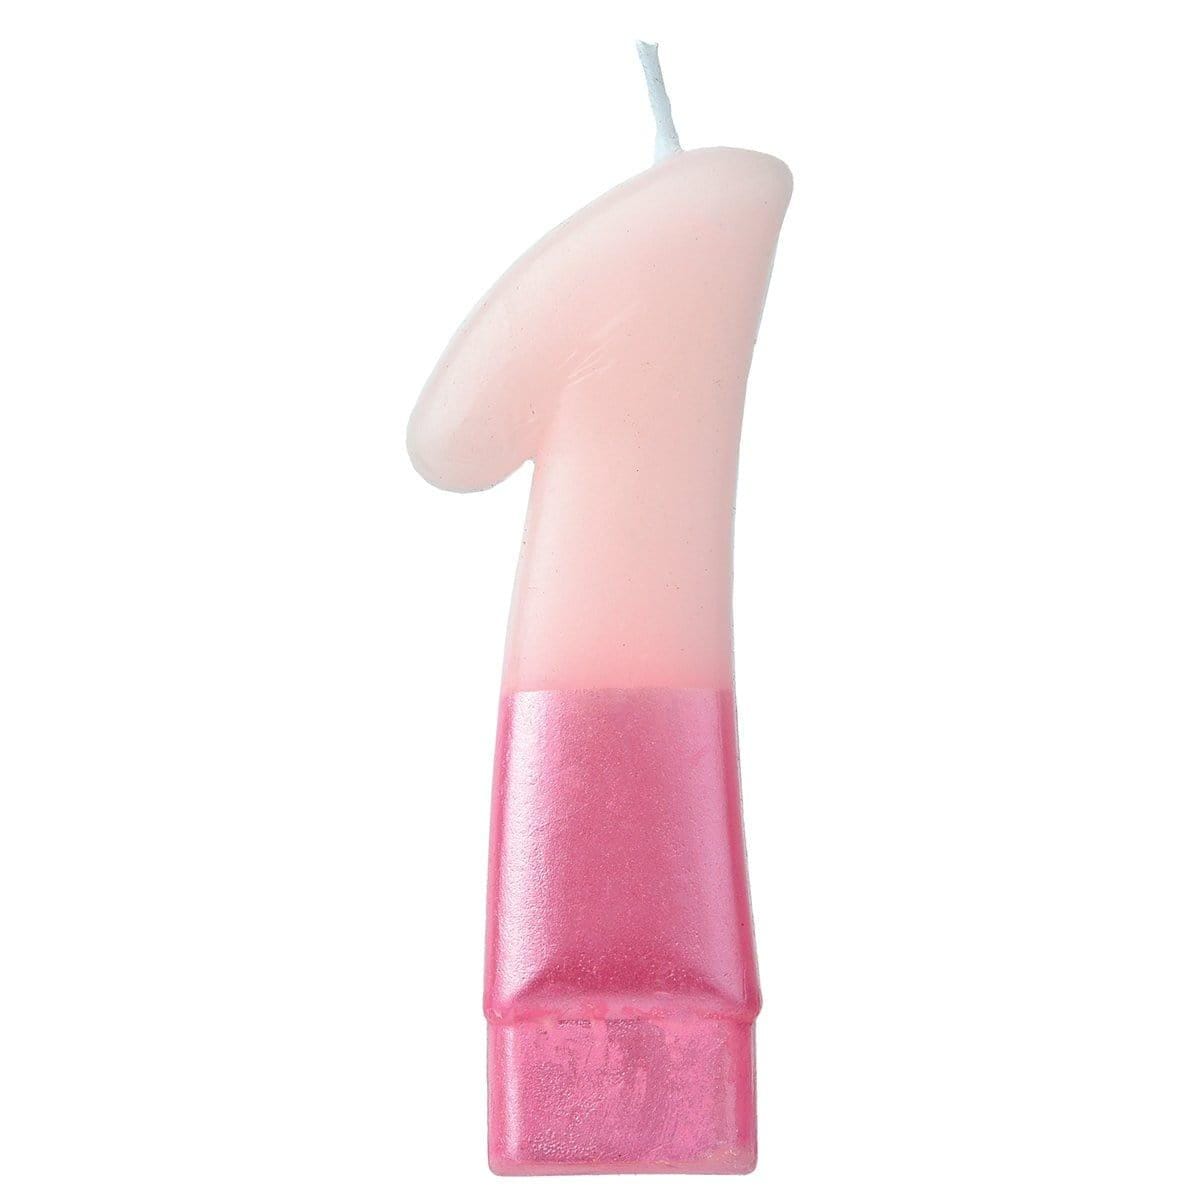 Buy Cake Supplies Pink Numeral Candle #1 sold at Party Expert